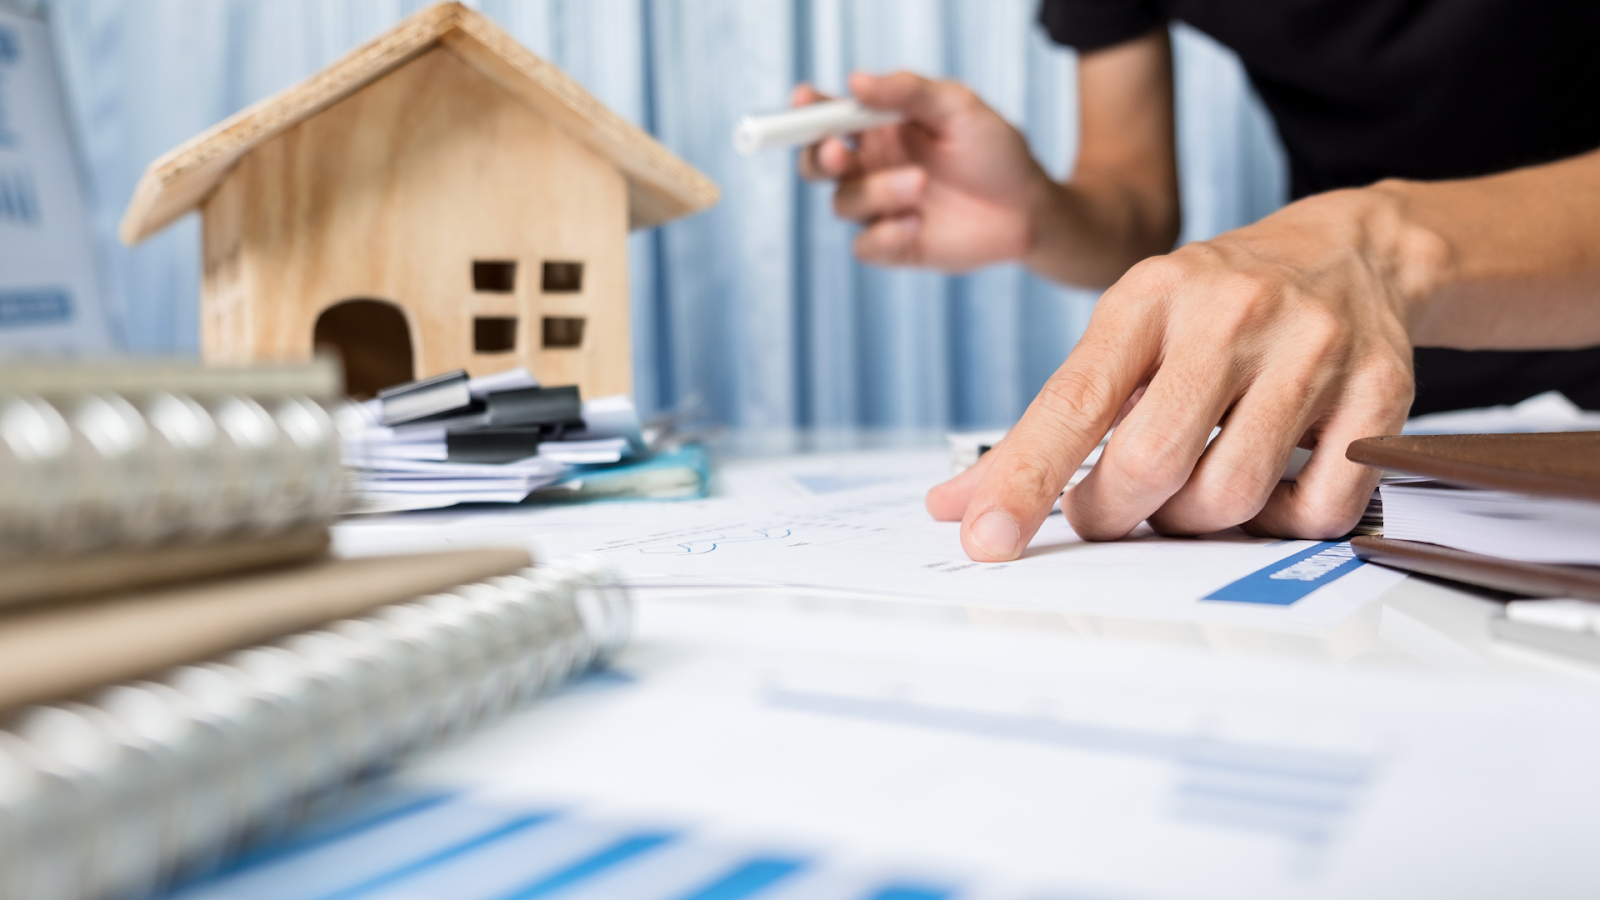 The crucial document in property transfer charges while transferring the property.